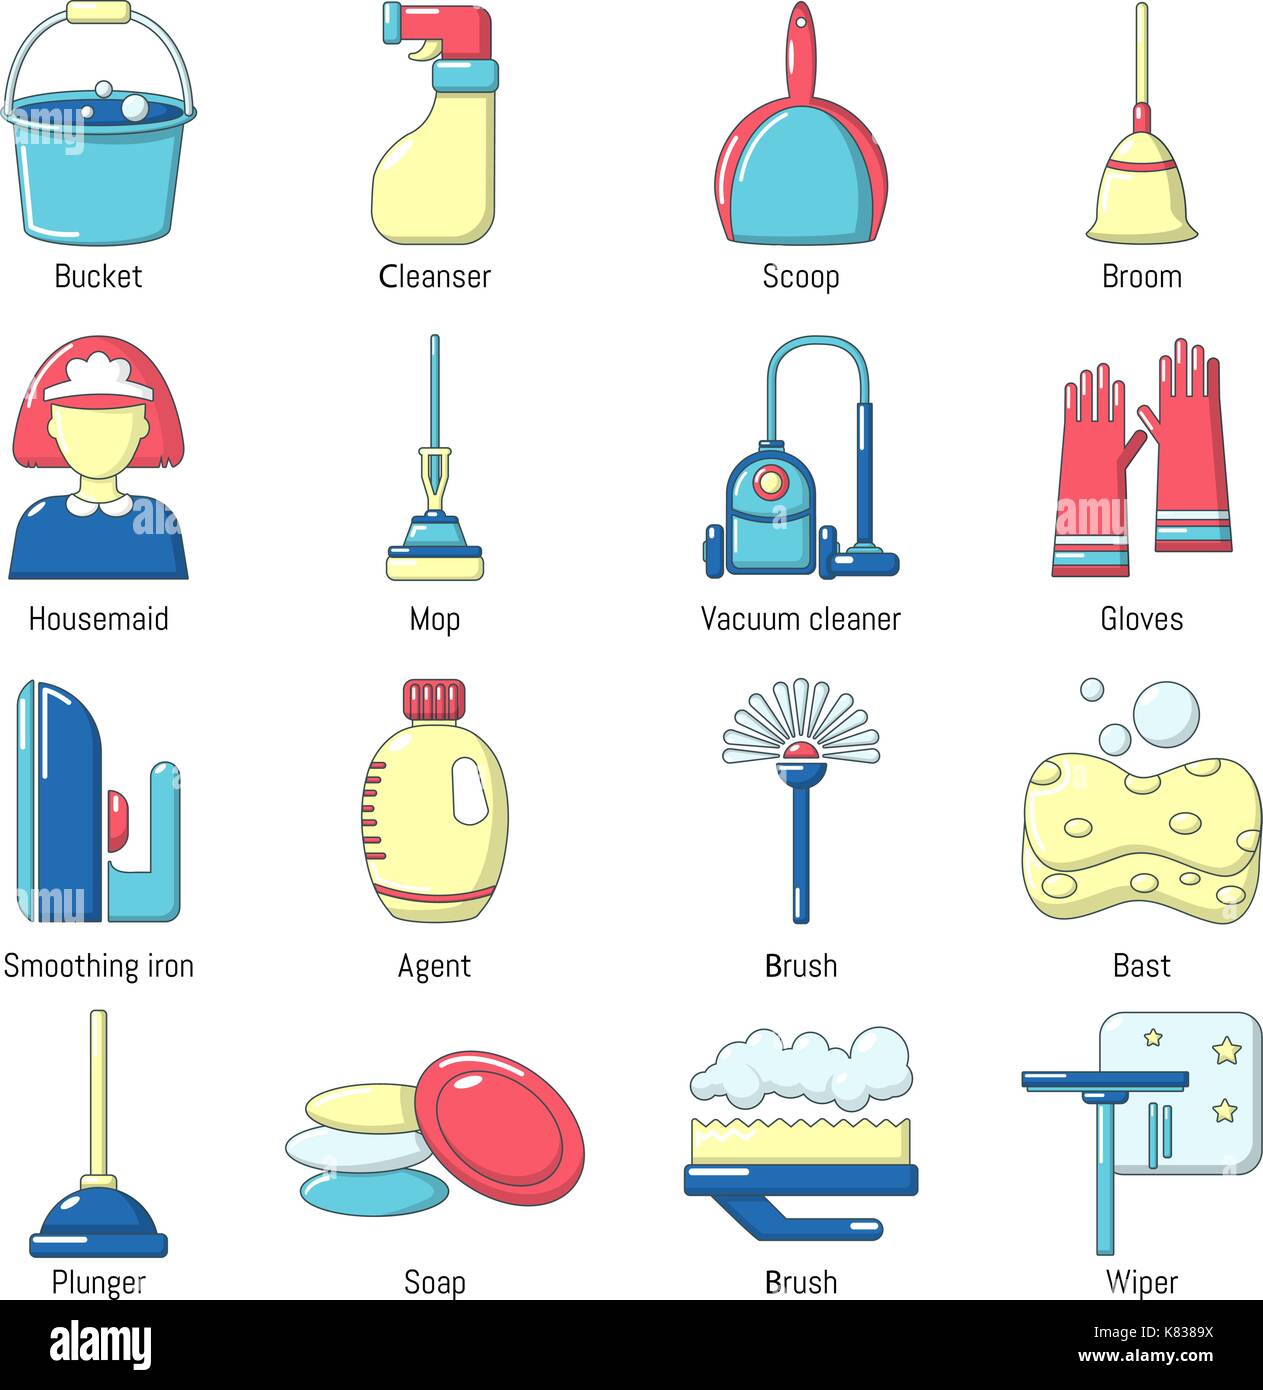 Cleaning Supplies Birminghamg